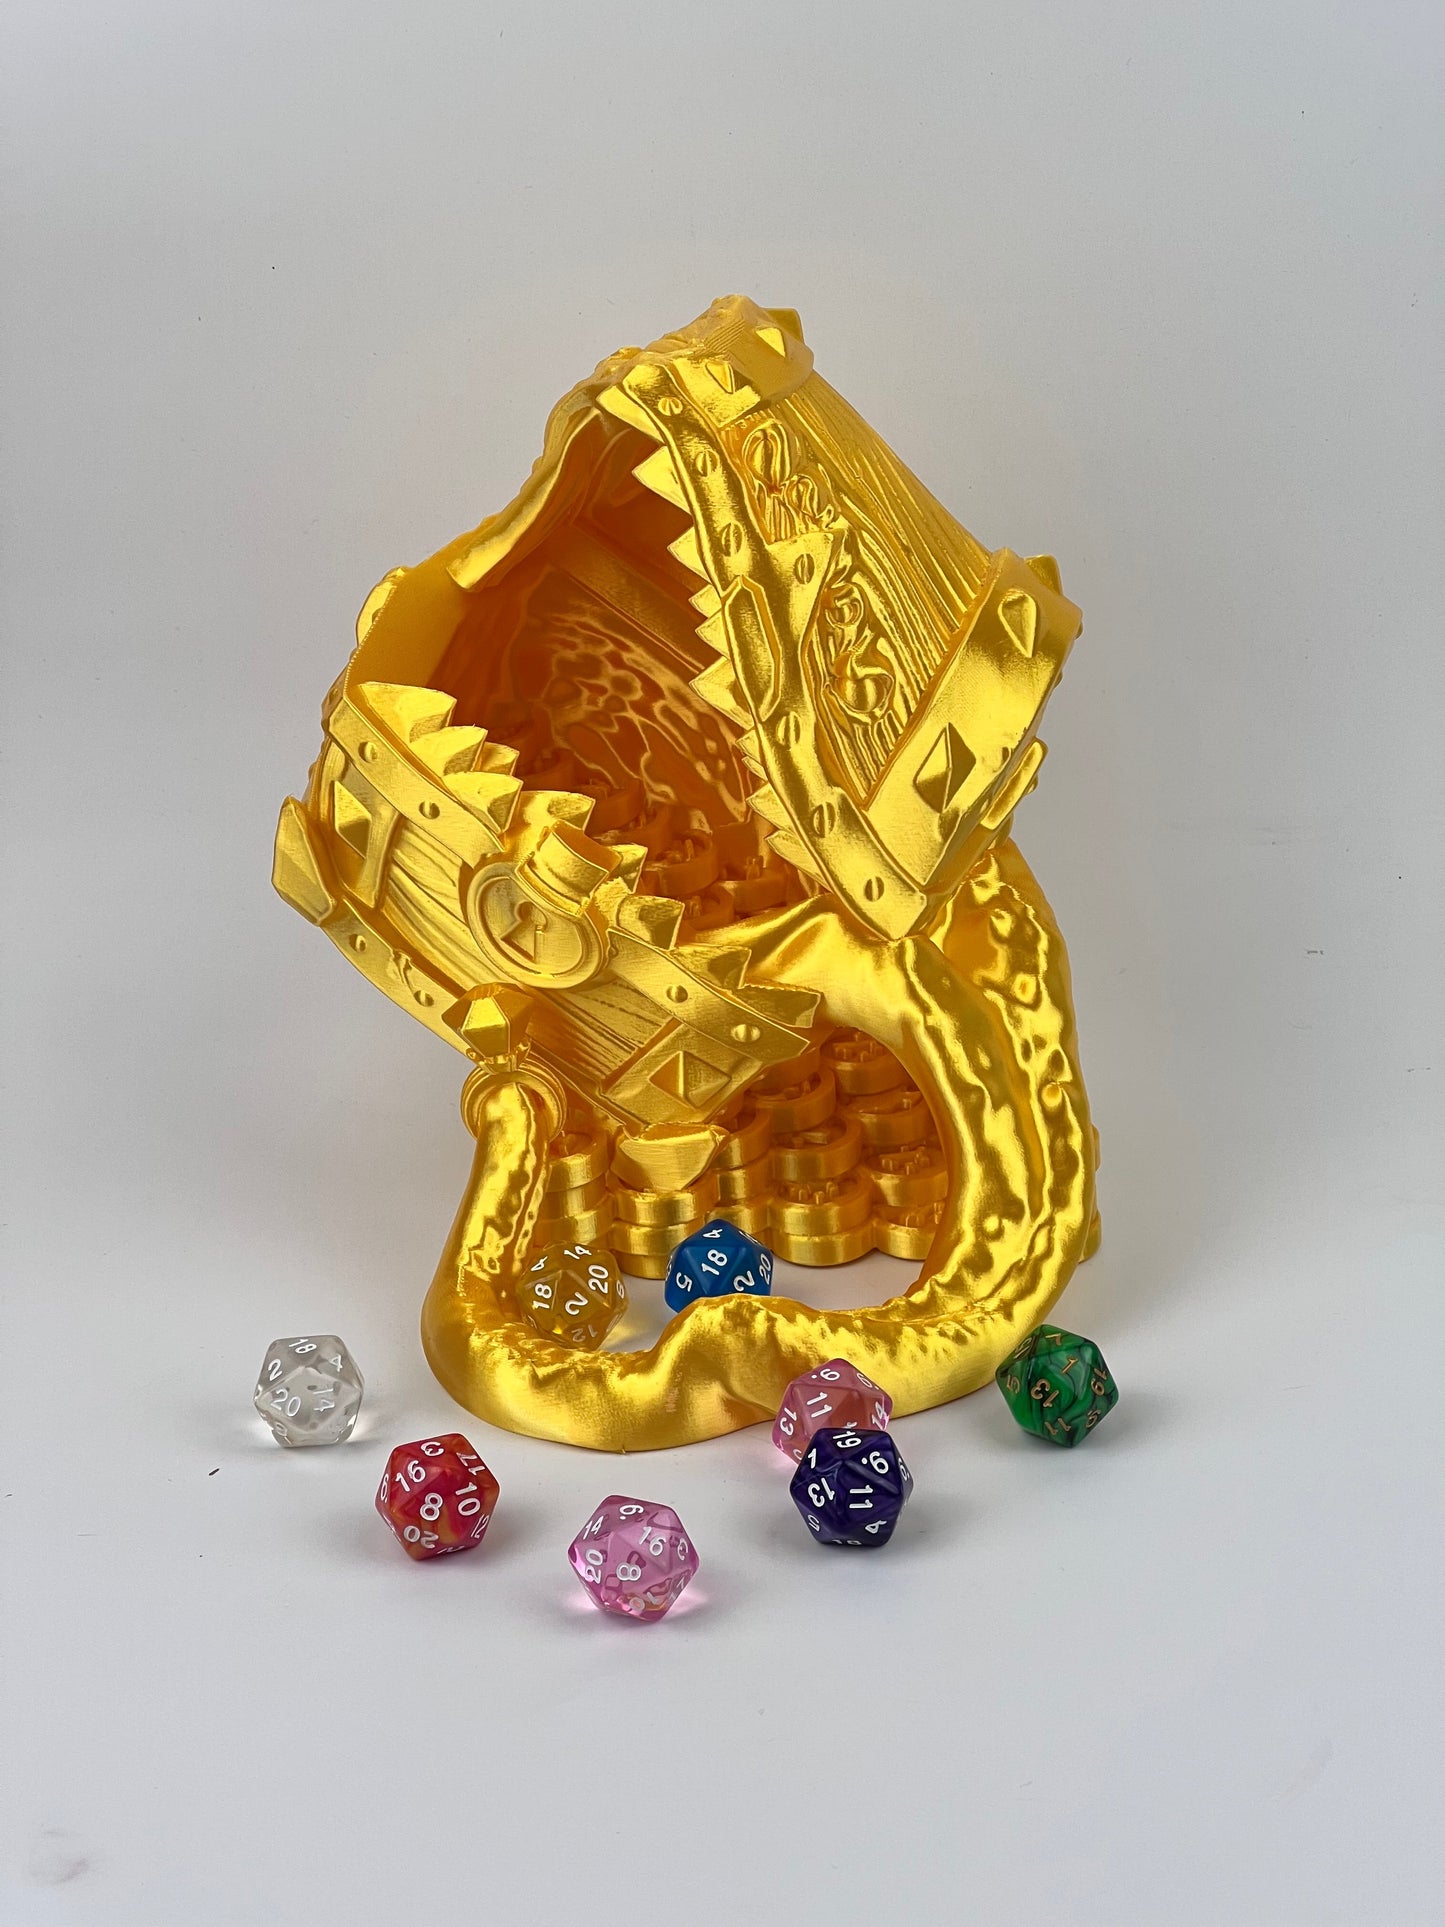 Spell Books Dice Tower Silk Colors